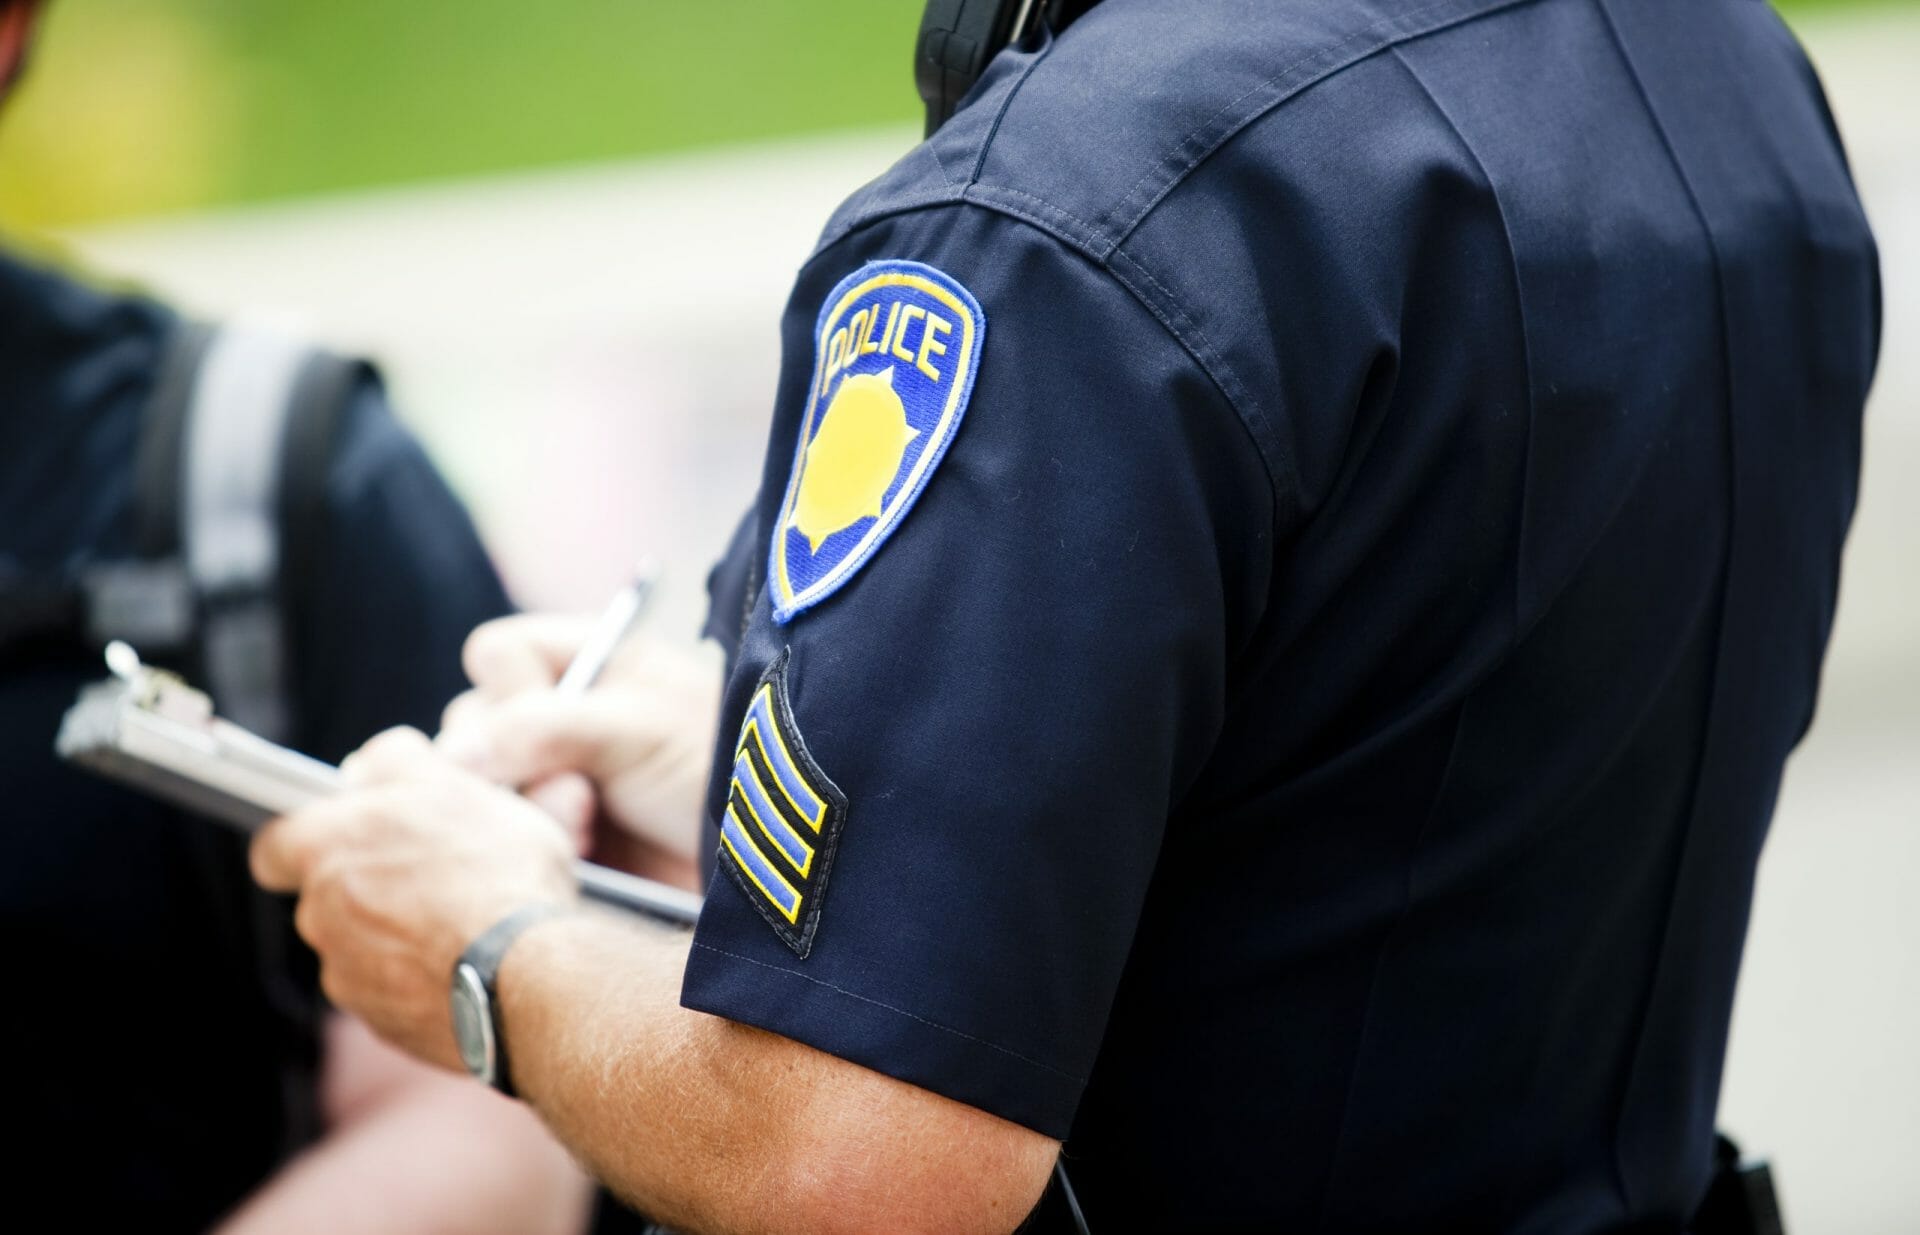 Police officer writing citation